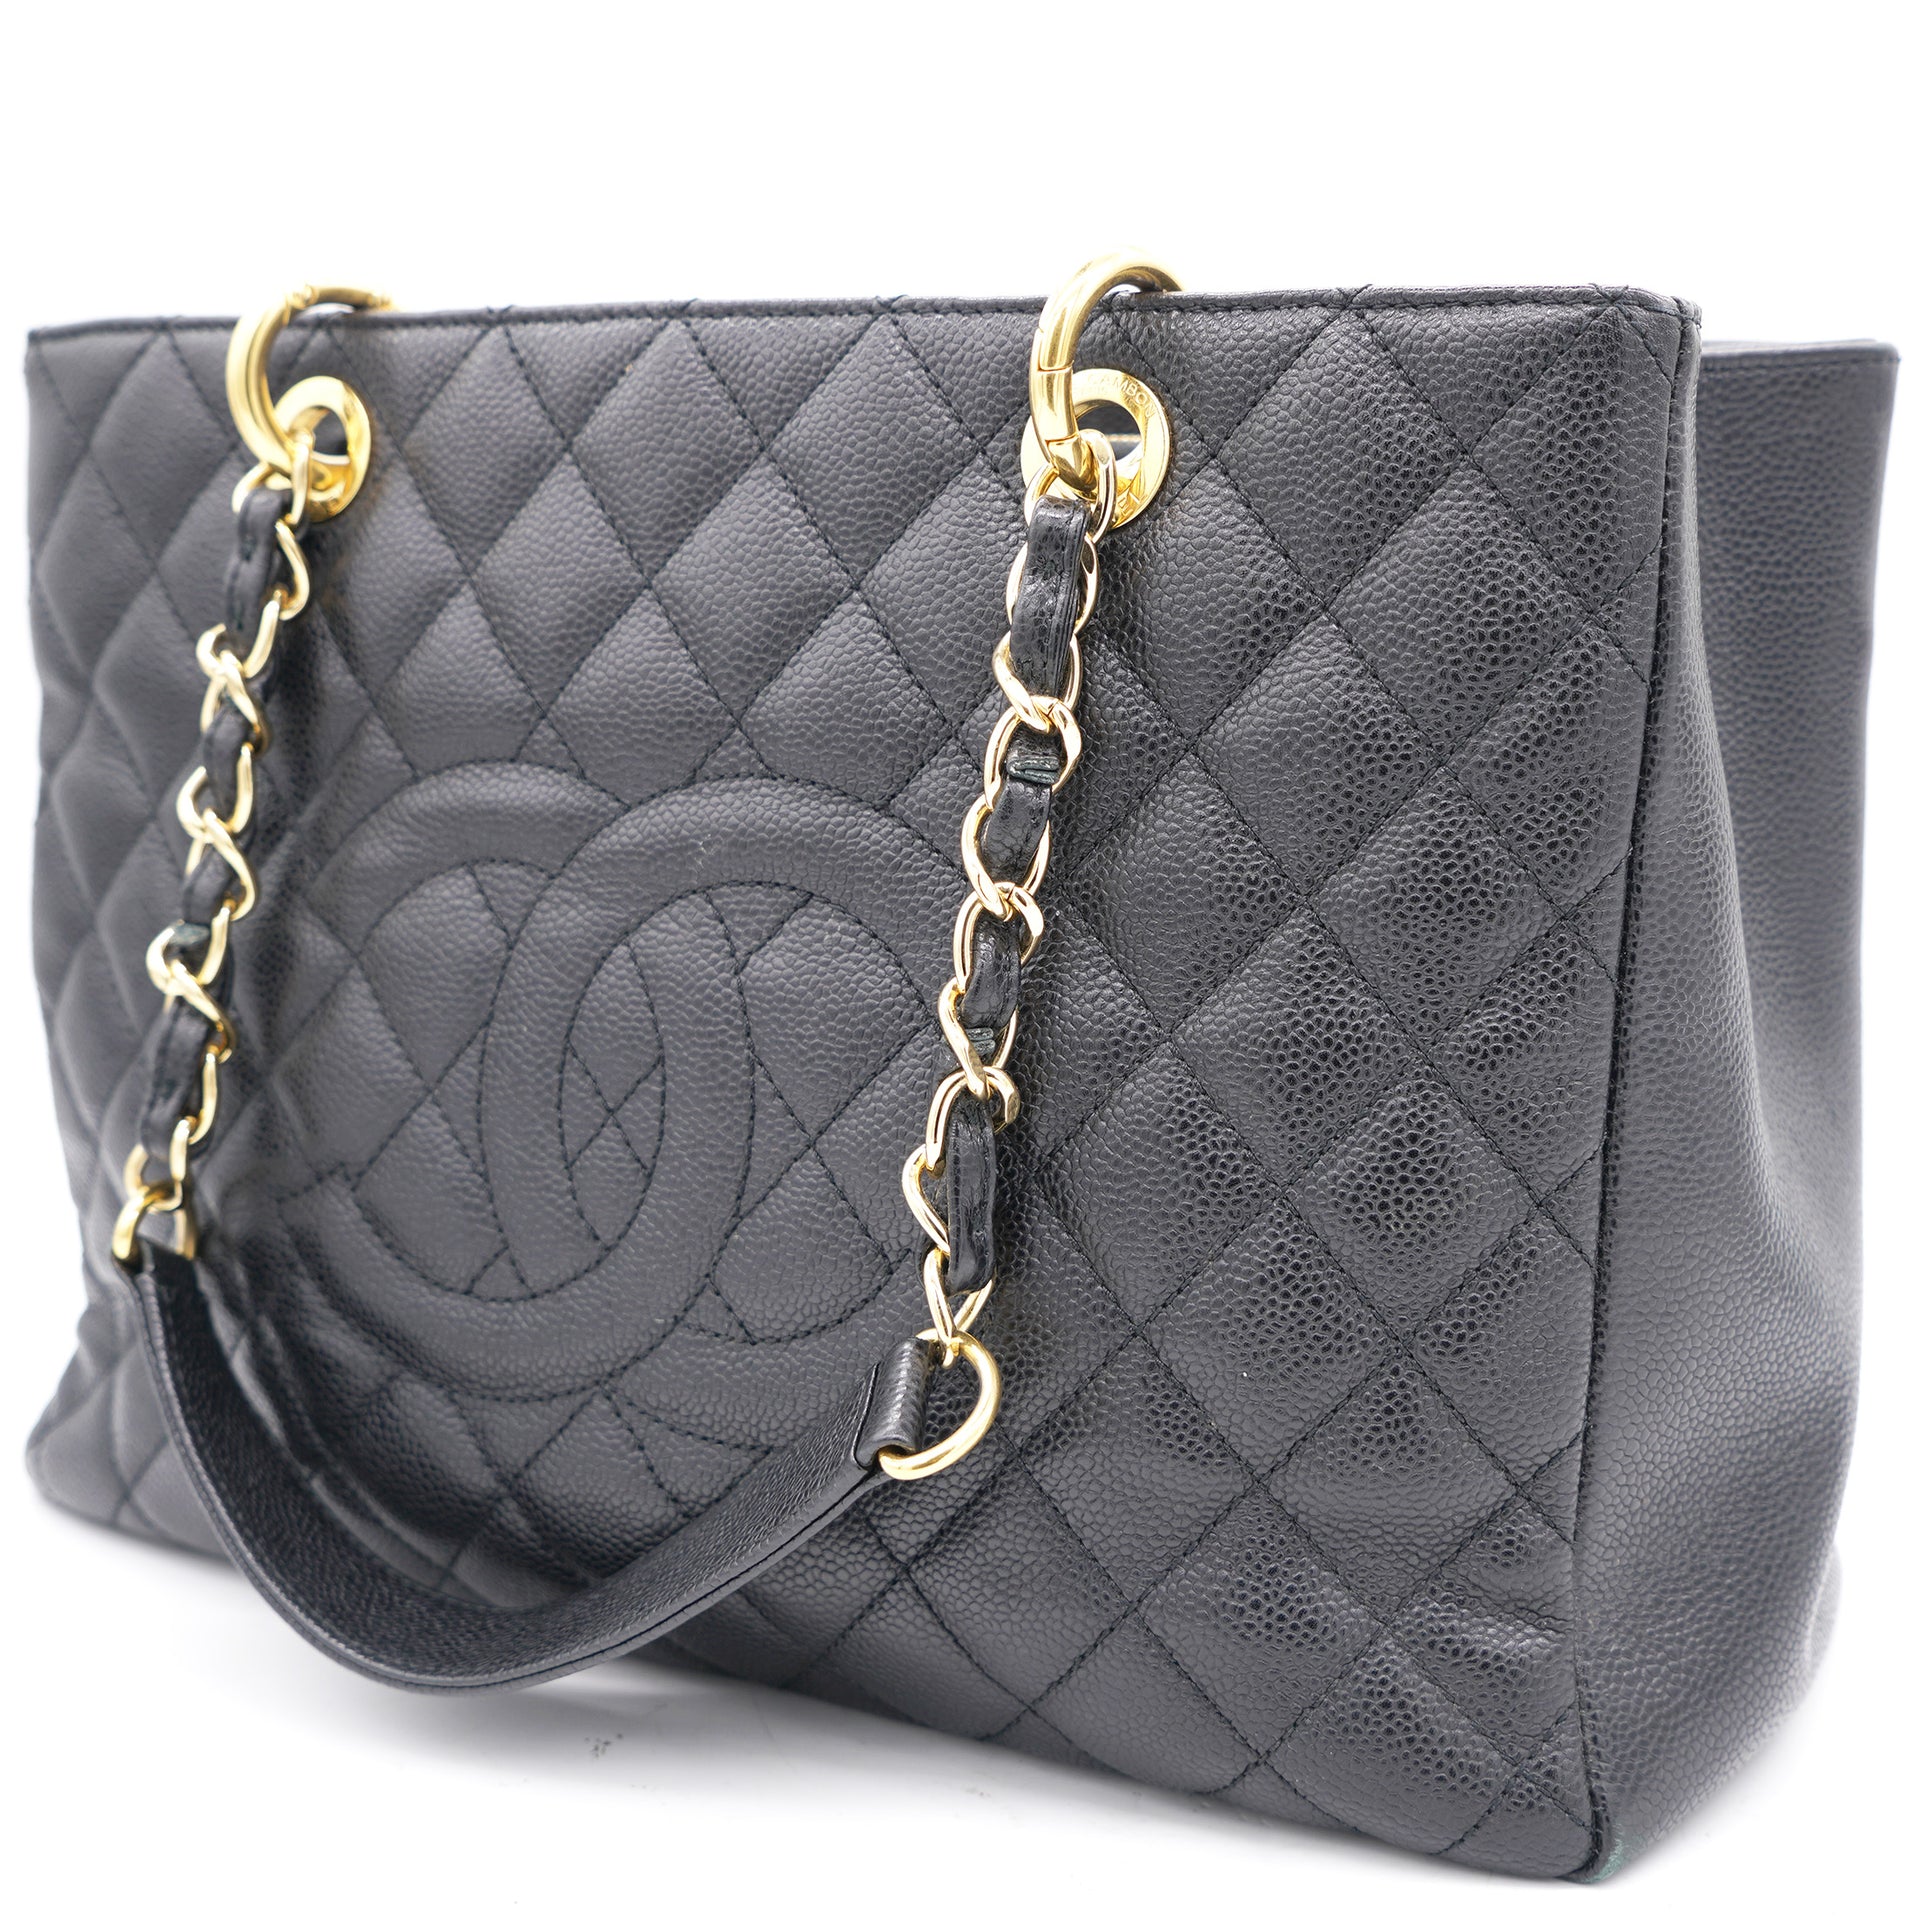 Black Quilted Caviar Leather Grand Shopper Tote